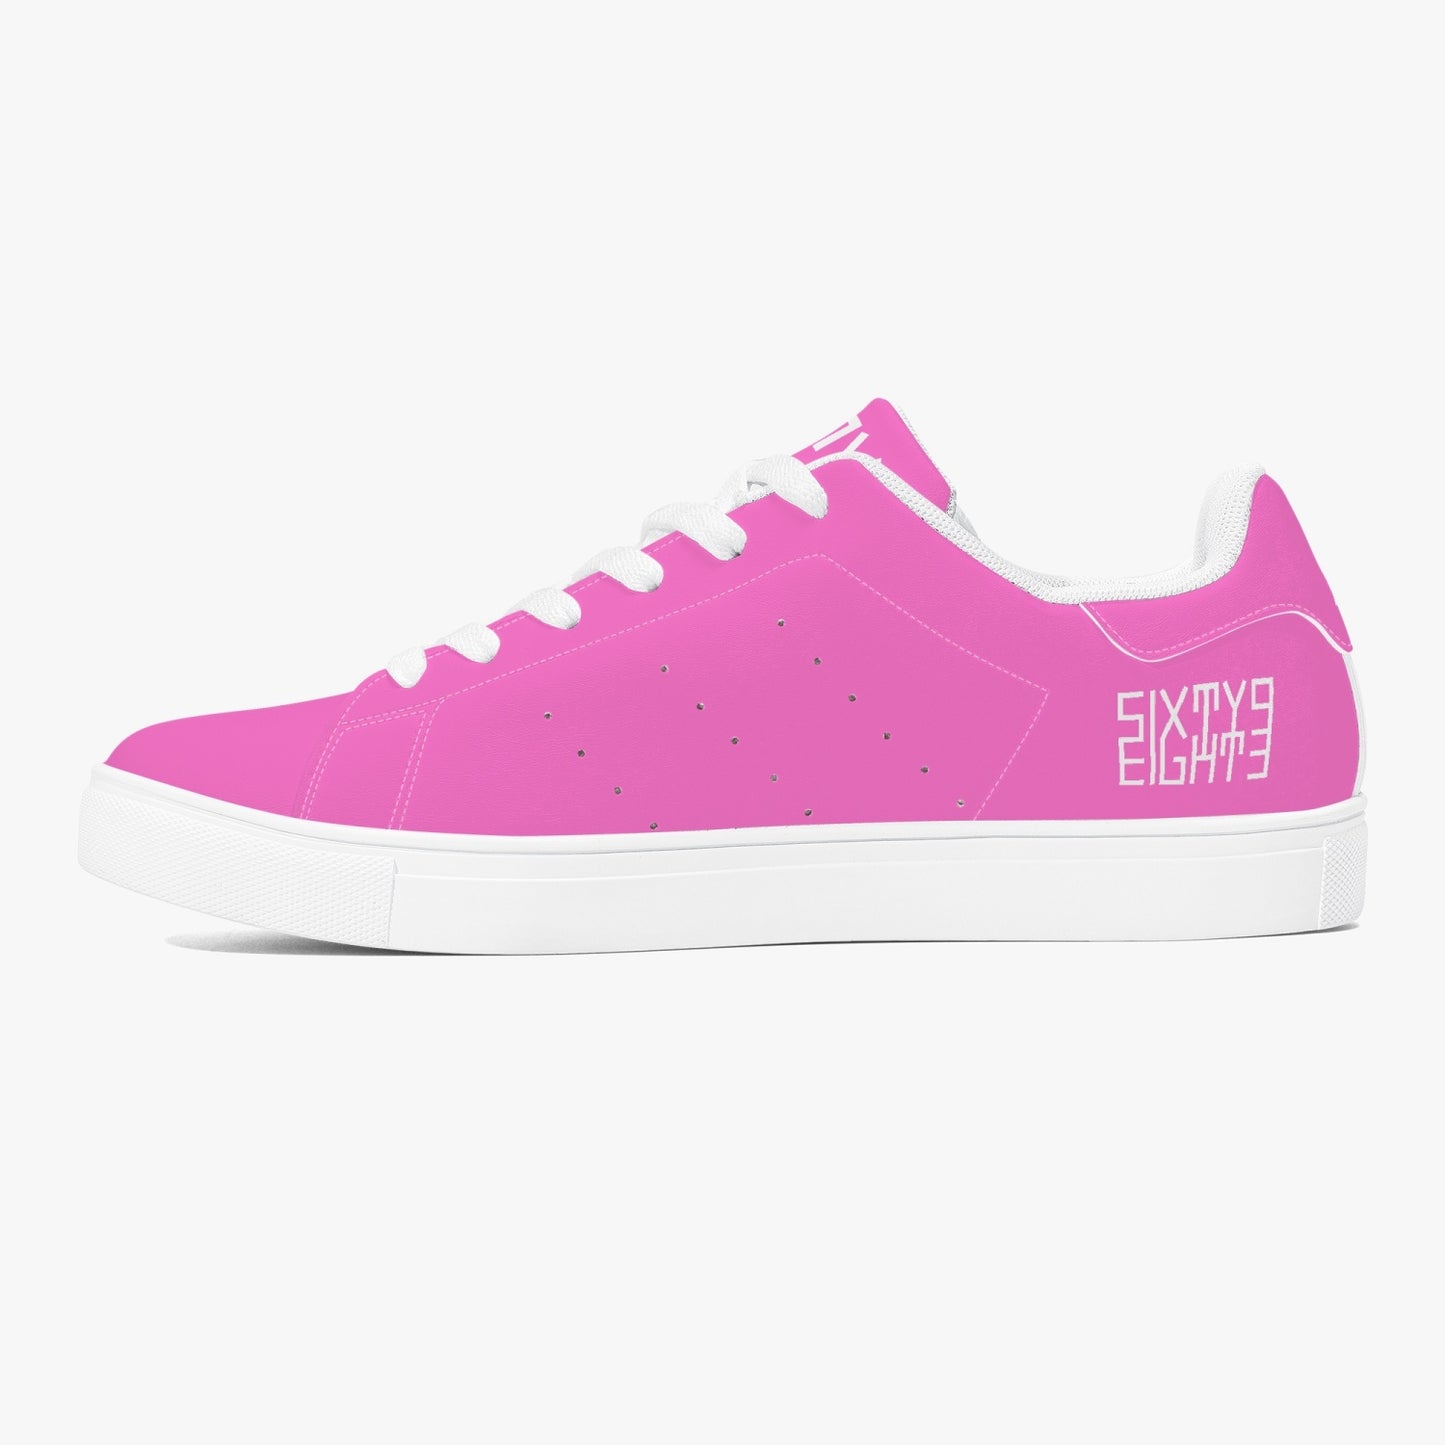 Sixty Eight 93 Logo White Pink Classic Low-Top Leather Shoes